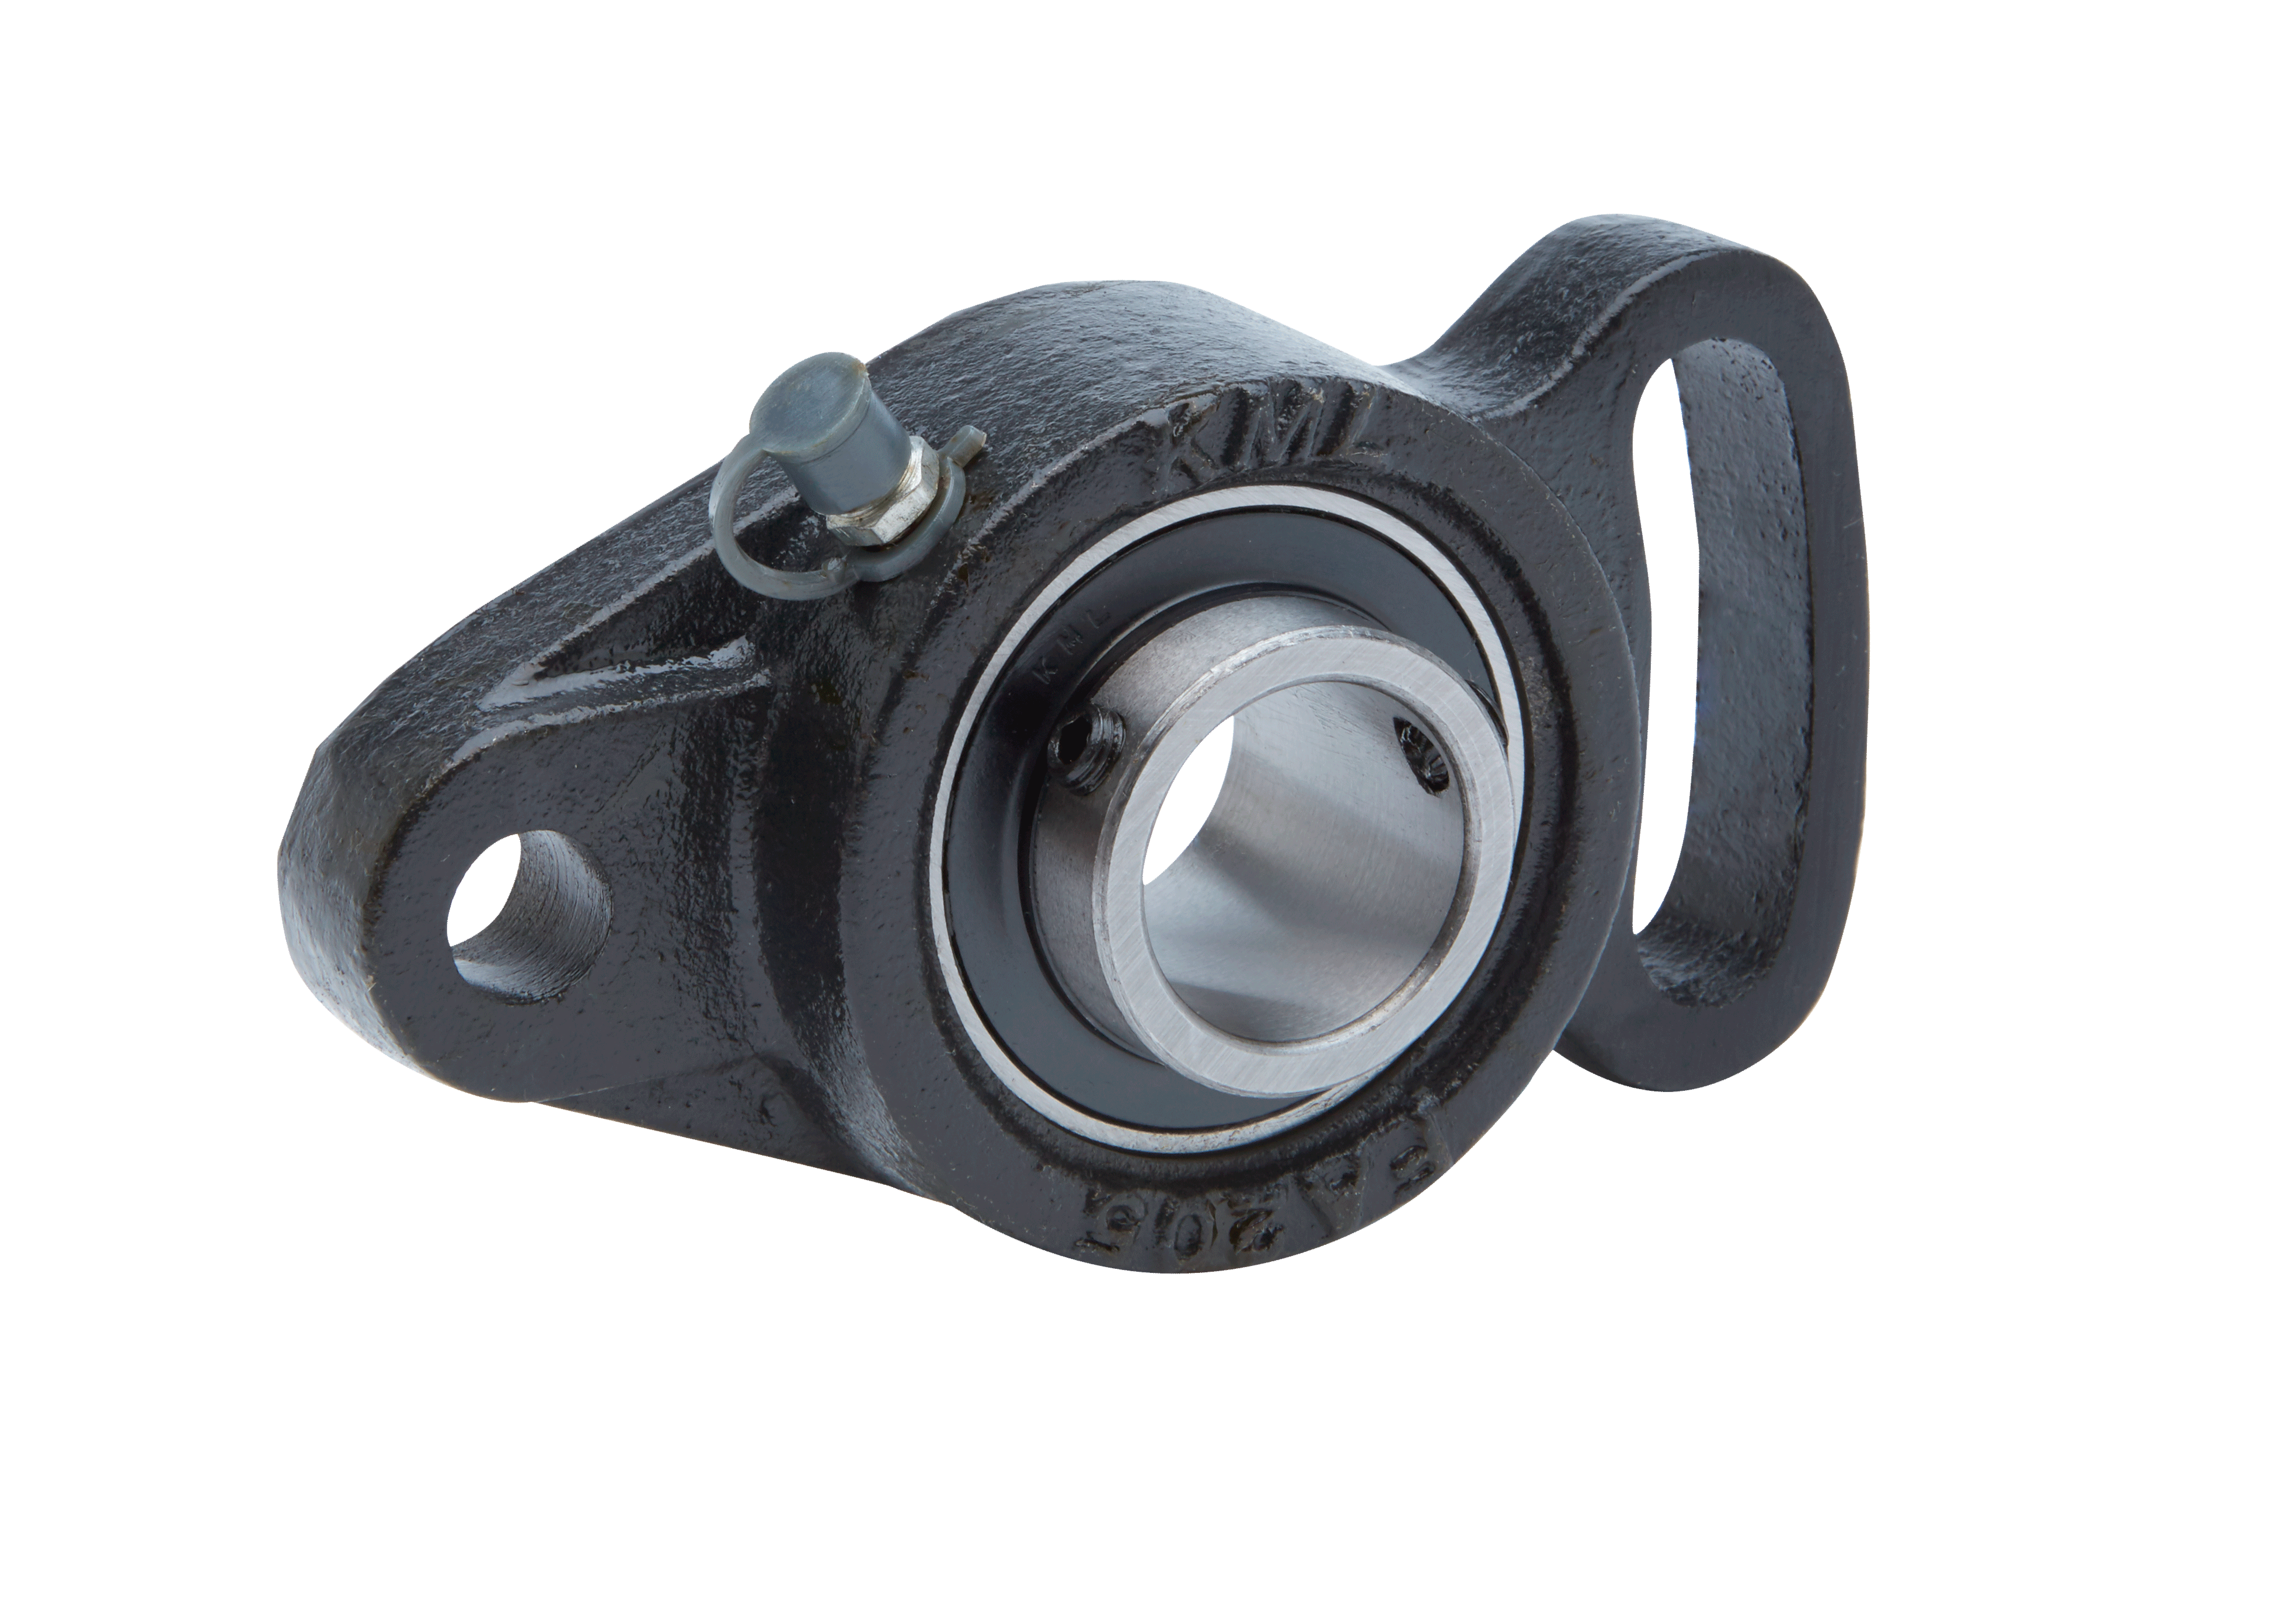 Two-Bolt Flange 124645 Flange-Mount Ball Bearing Unit Intermediate Duty Set Screw Locking 1.0000 in Bore Contact Seal Ductile Iron Housing 